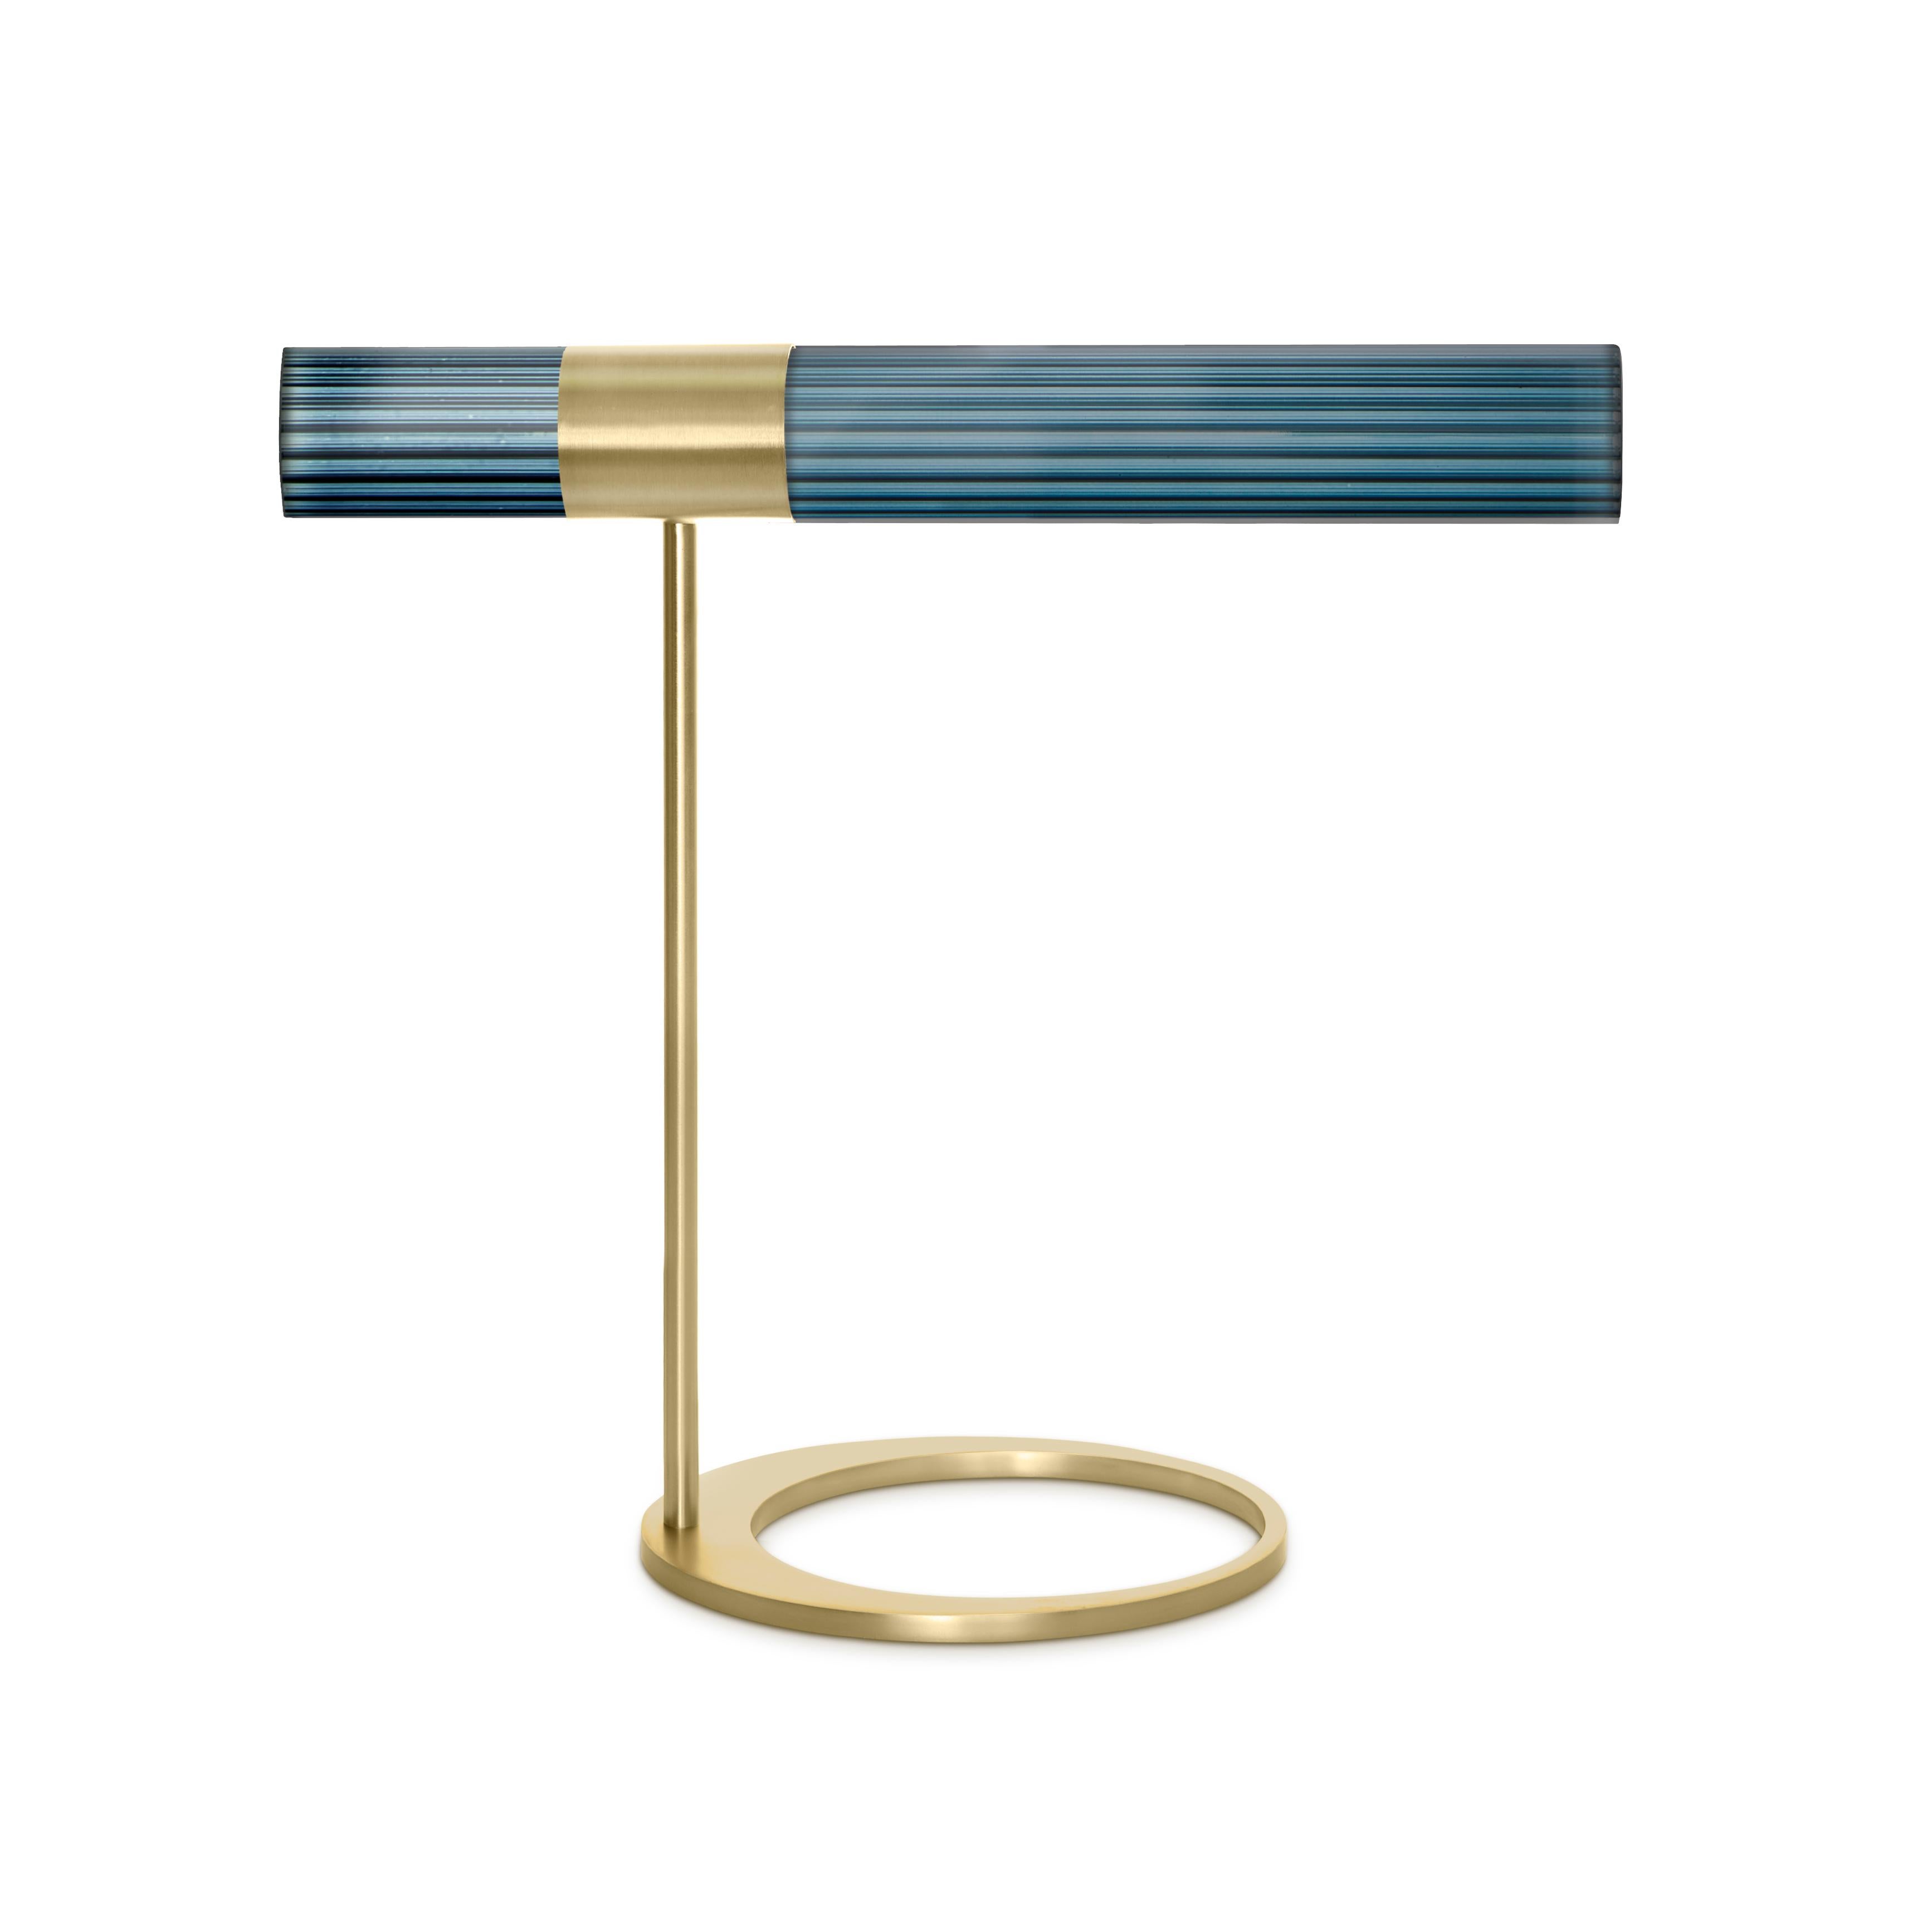 Sbarlusc table lamp by Luce Tu
Dimensions: 49 x 46 cm
Materials: Brass and glass

Sbarlusc in Milanese dialect represents the sparkle of a precious and very bright object. The colored glasses, which combine with each other creating games of